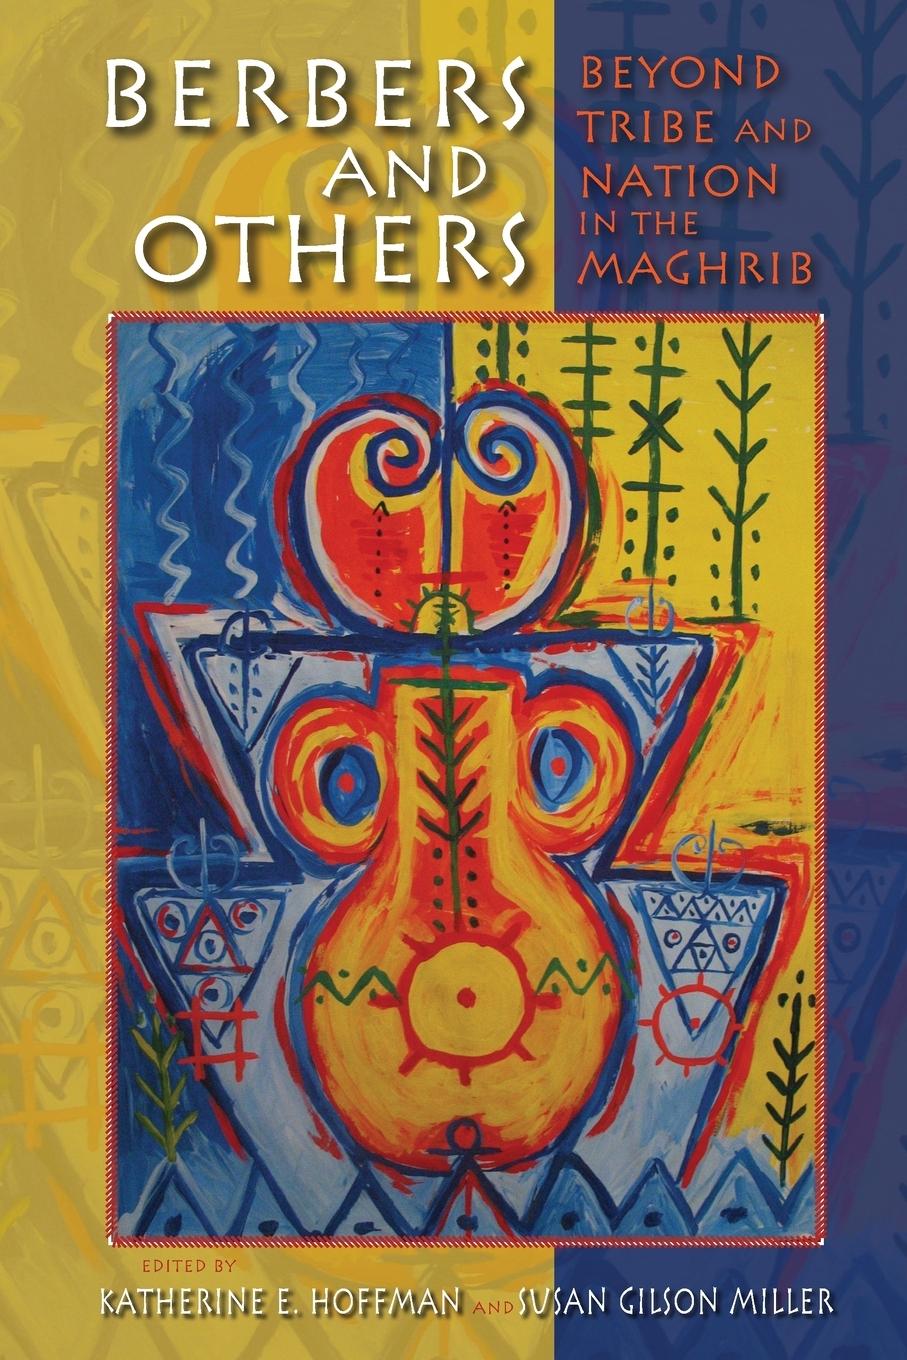 Berbers and Others | Beyond Tribe and Nation in the Maghrib | Katherine E. Hoffman (u. a.) | Taschenbuch | 2010 | EAN 9780253222008 - Hoffman, Katherine E.